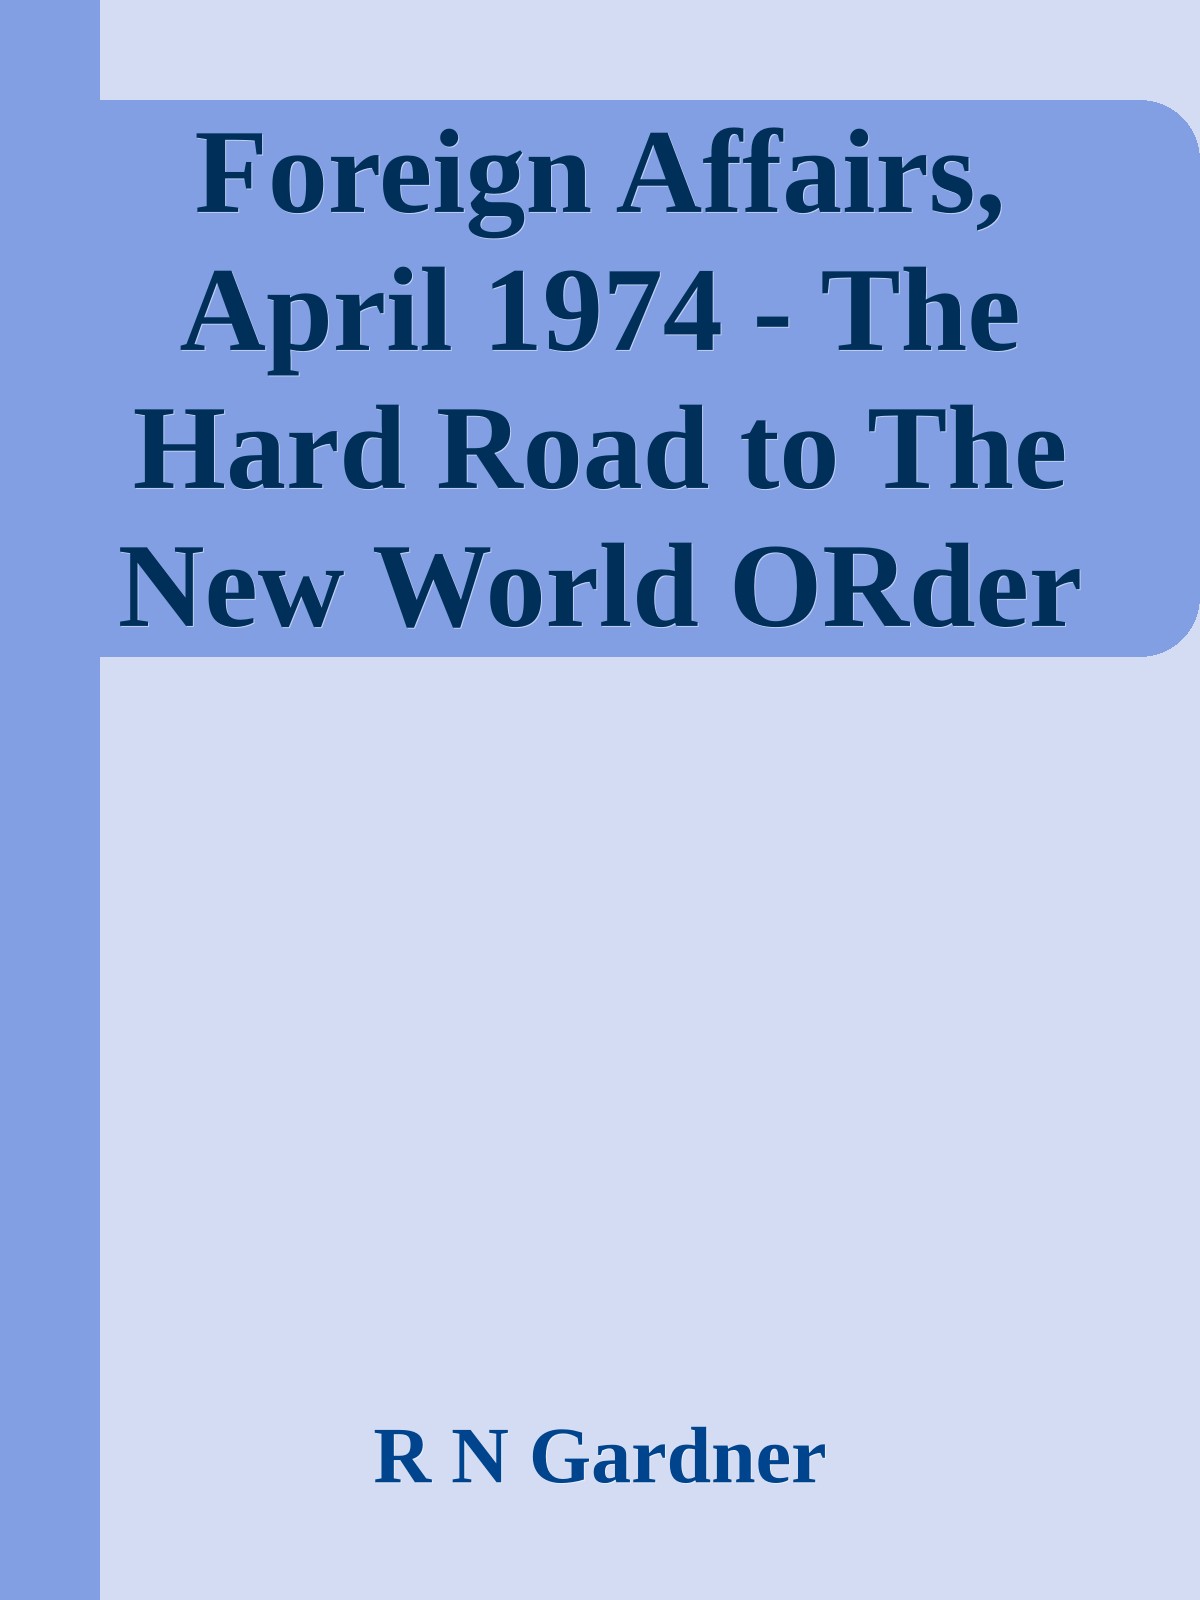 Foreign Affairs, April 1974 - The Hard Road to The New World Order (1974) by R N Gardner